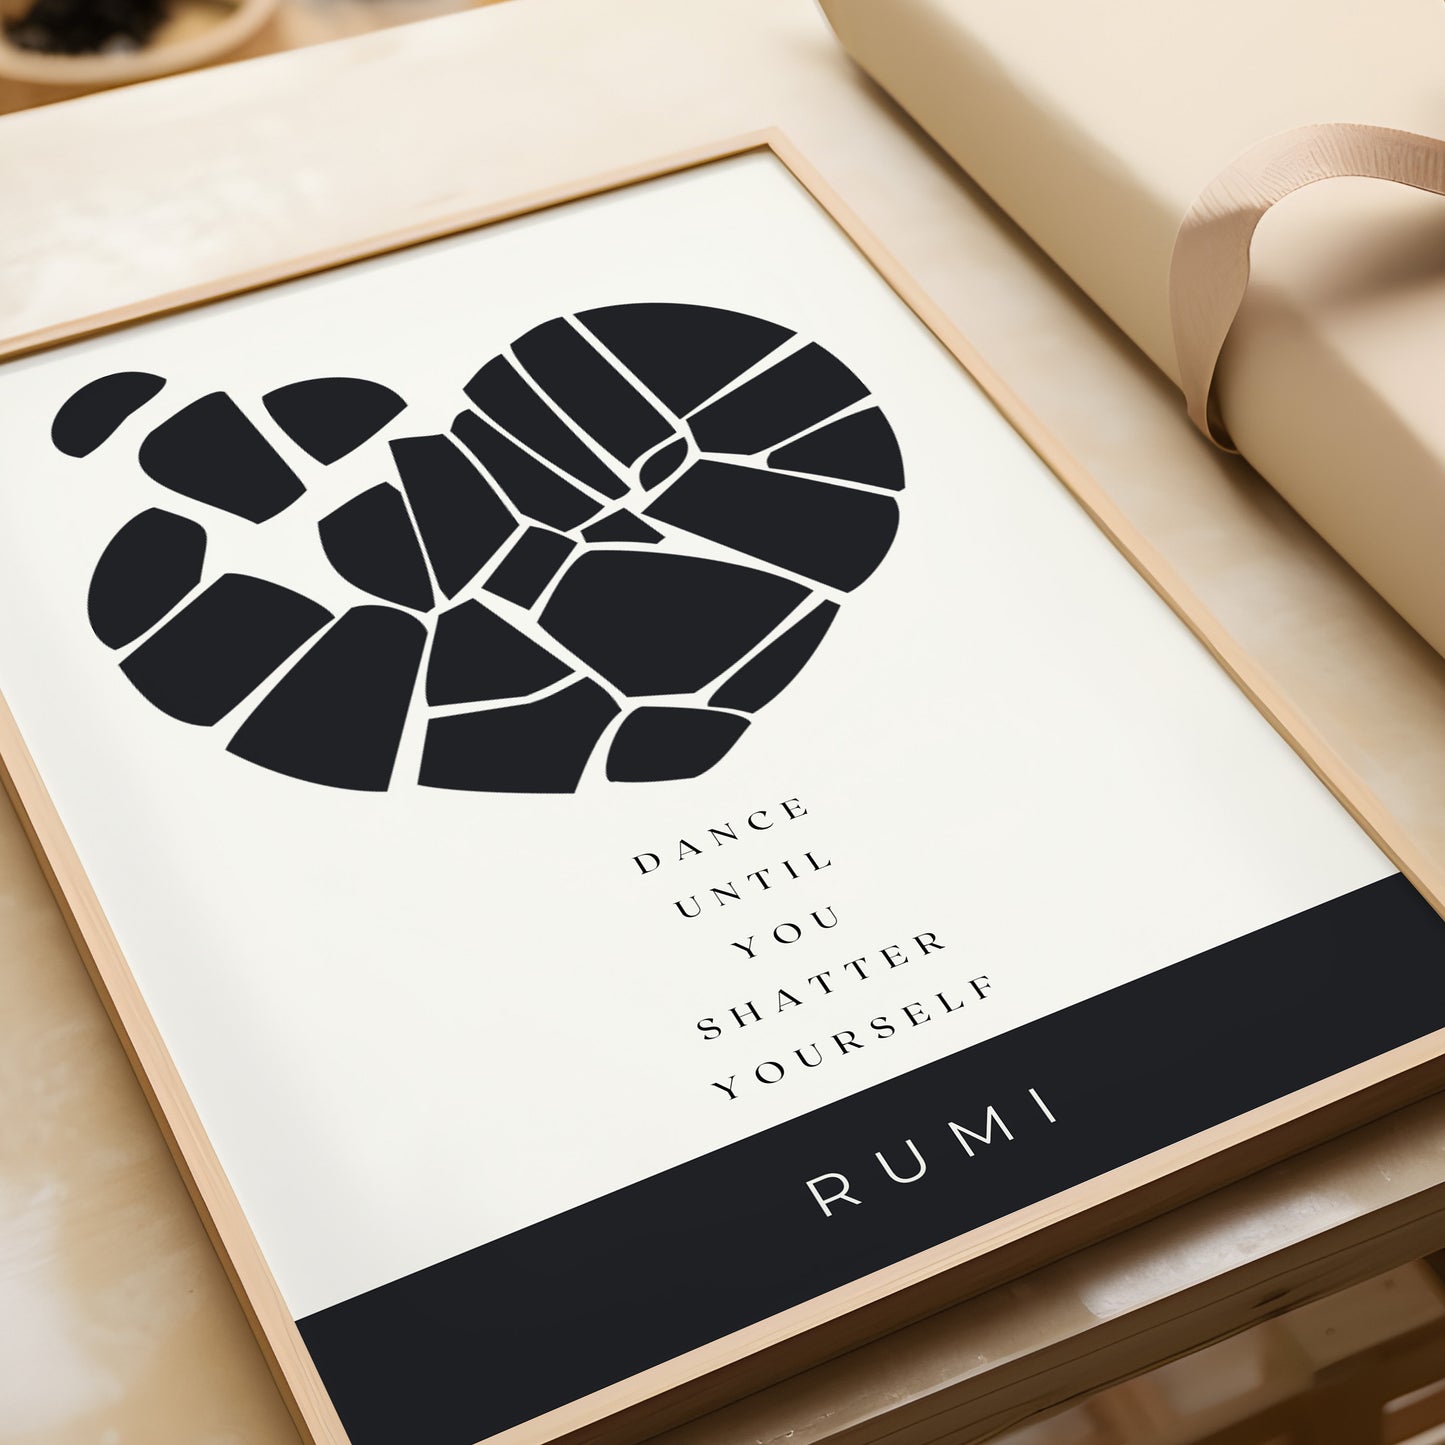 Rumi - Dance Until You Shatter Yourself | Inspiration Neutral Poetry Quote Dancer Gift Poster (available framed or unframed)